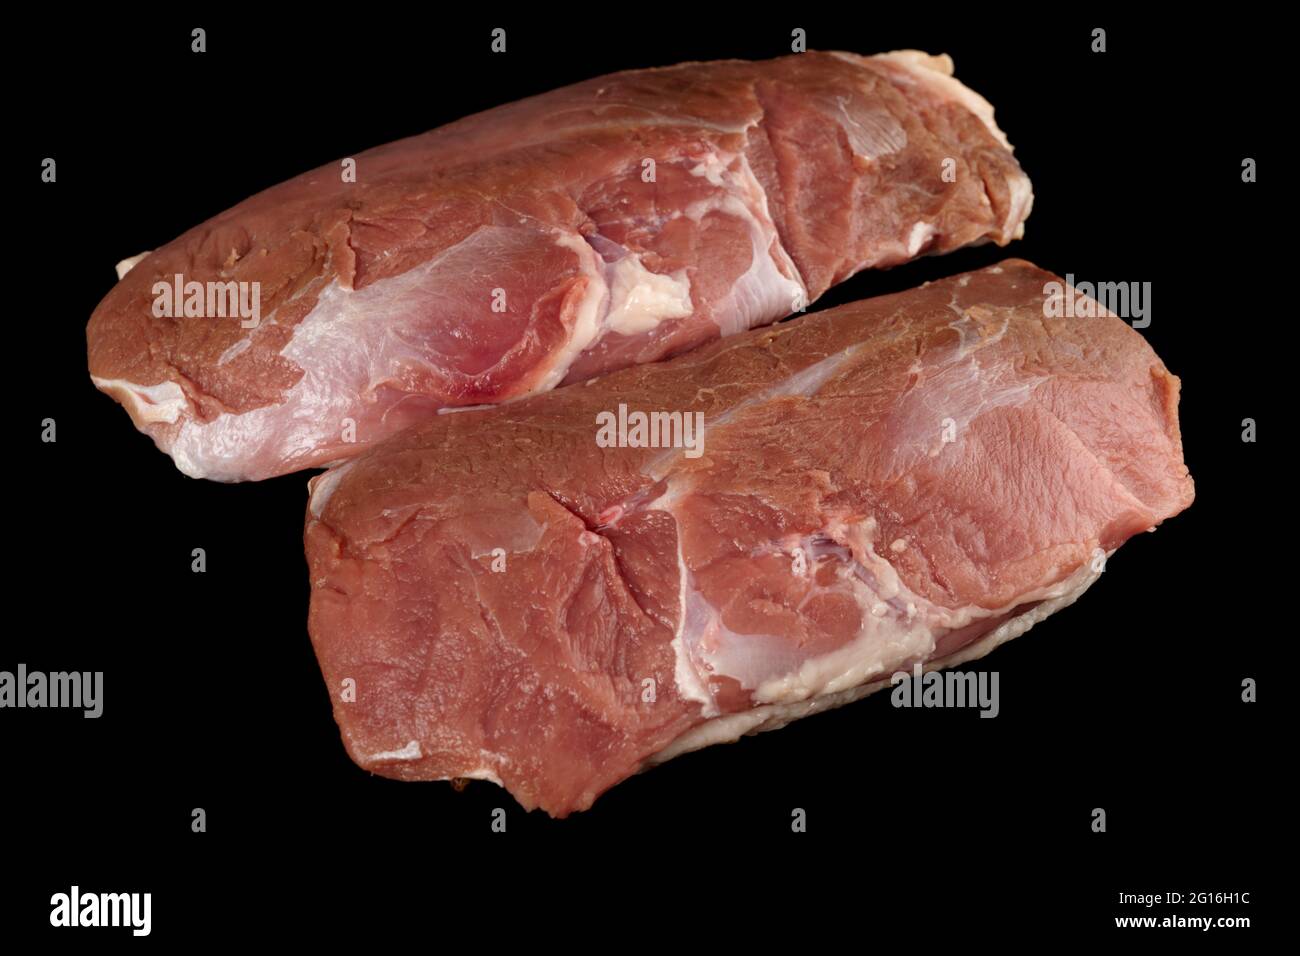 Two duck fillets isolated on black background Stock Photo